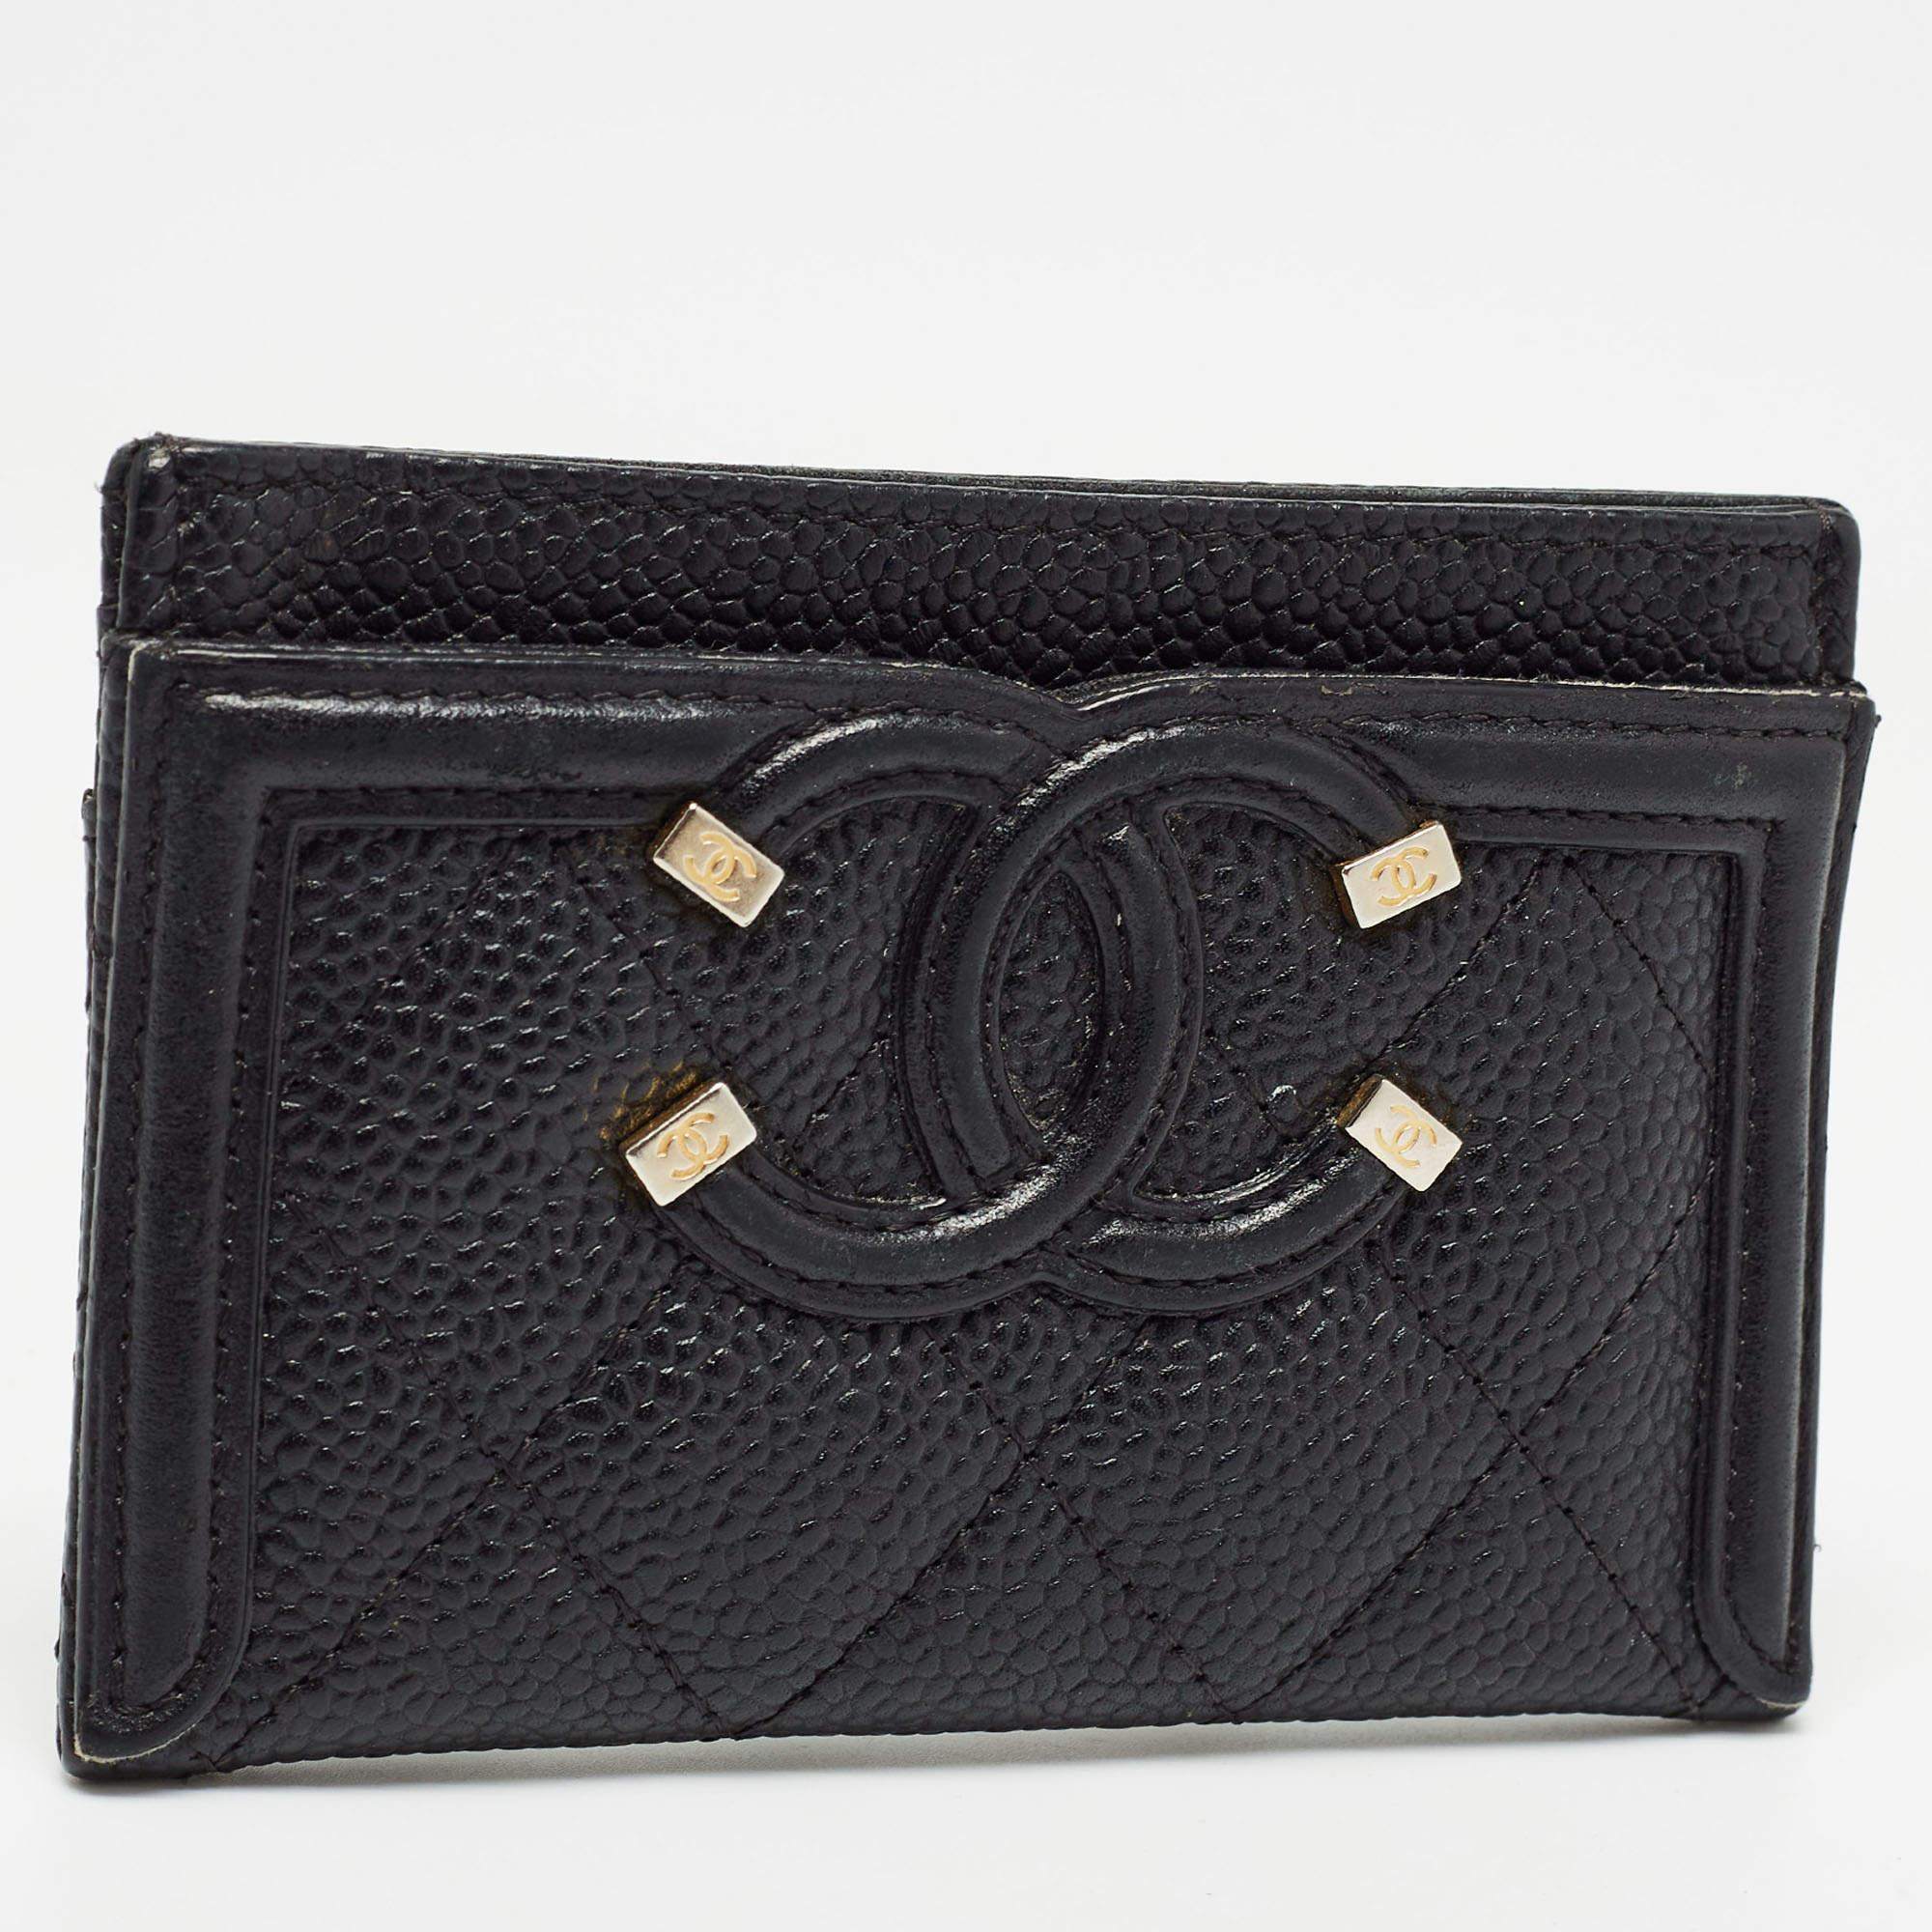 Designed to perfection and crafted from fine quality caviar leather, this cardholder can be your go-to accessory. Bringing elegance and class to your pocket, this creation from Chanel is stylish and convenient. It exhibits the iconic CC logo on the